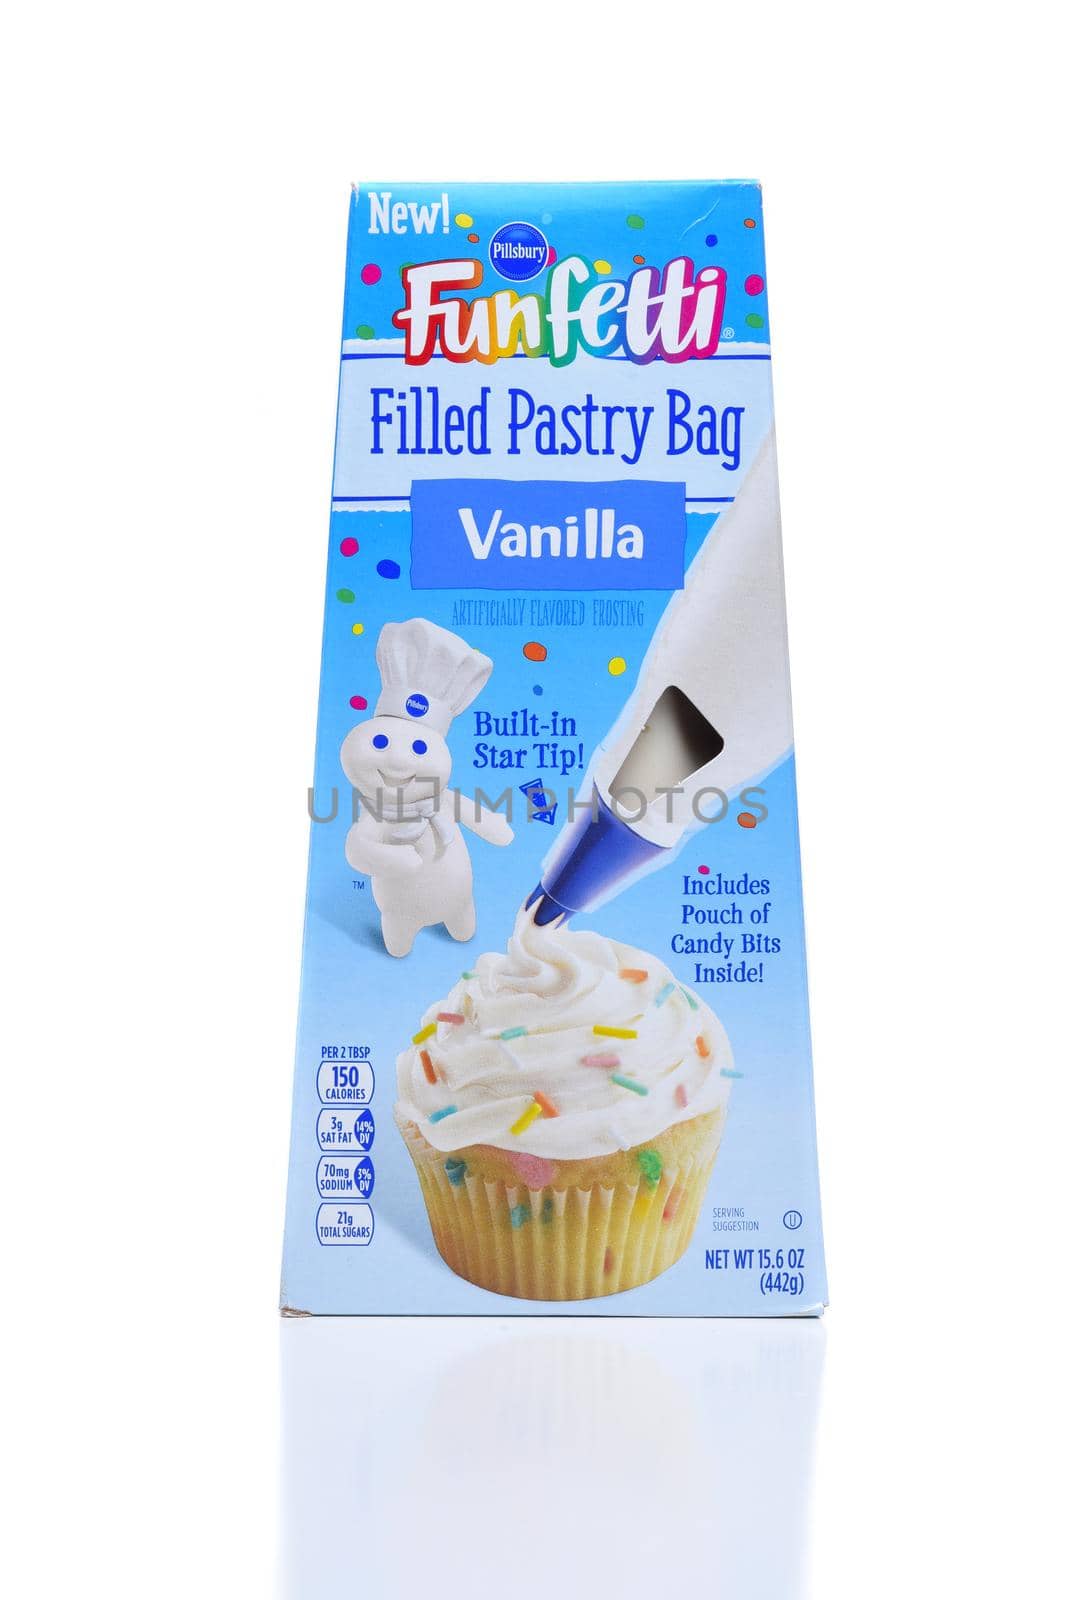 IRVINE, CALIFORNIA - DEC 4, 2018: Pillsbury Filled Pastry Bag Funfetti Vanilla. With a built-in star tip, you can make four distinct designs: stars, rosettes, swirls and waves. 